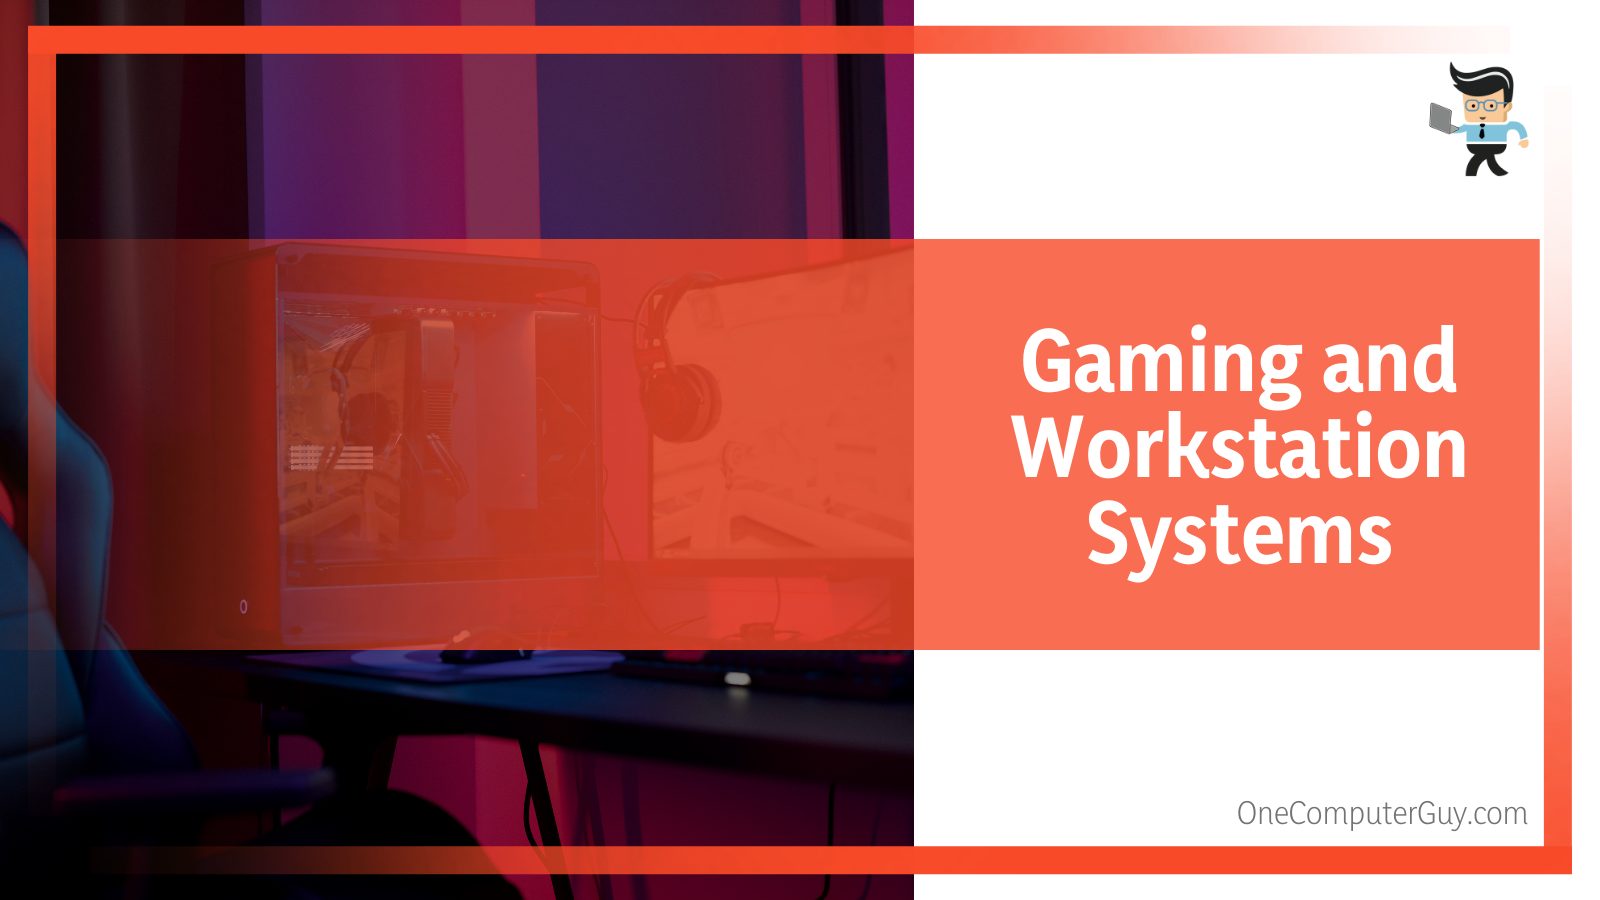 Gaming and Workstation Systems